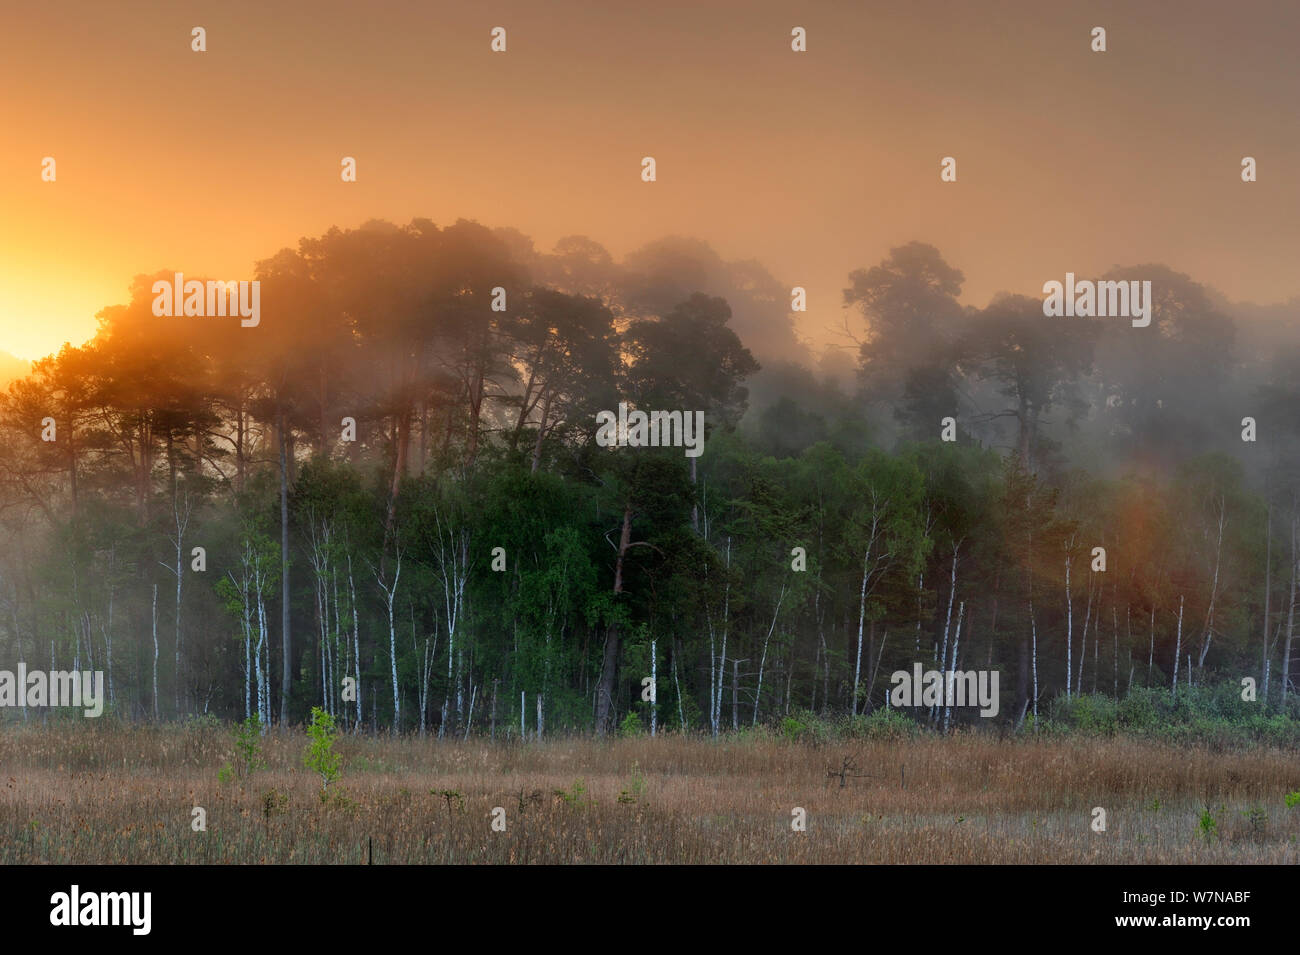 Dawn sunrise over woodlands of Serrahnbruch, Muritz National Park, Germany, May Stock Photo